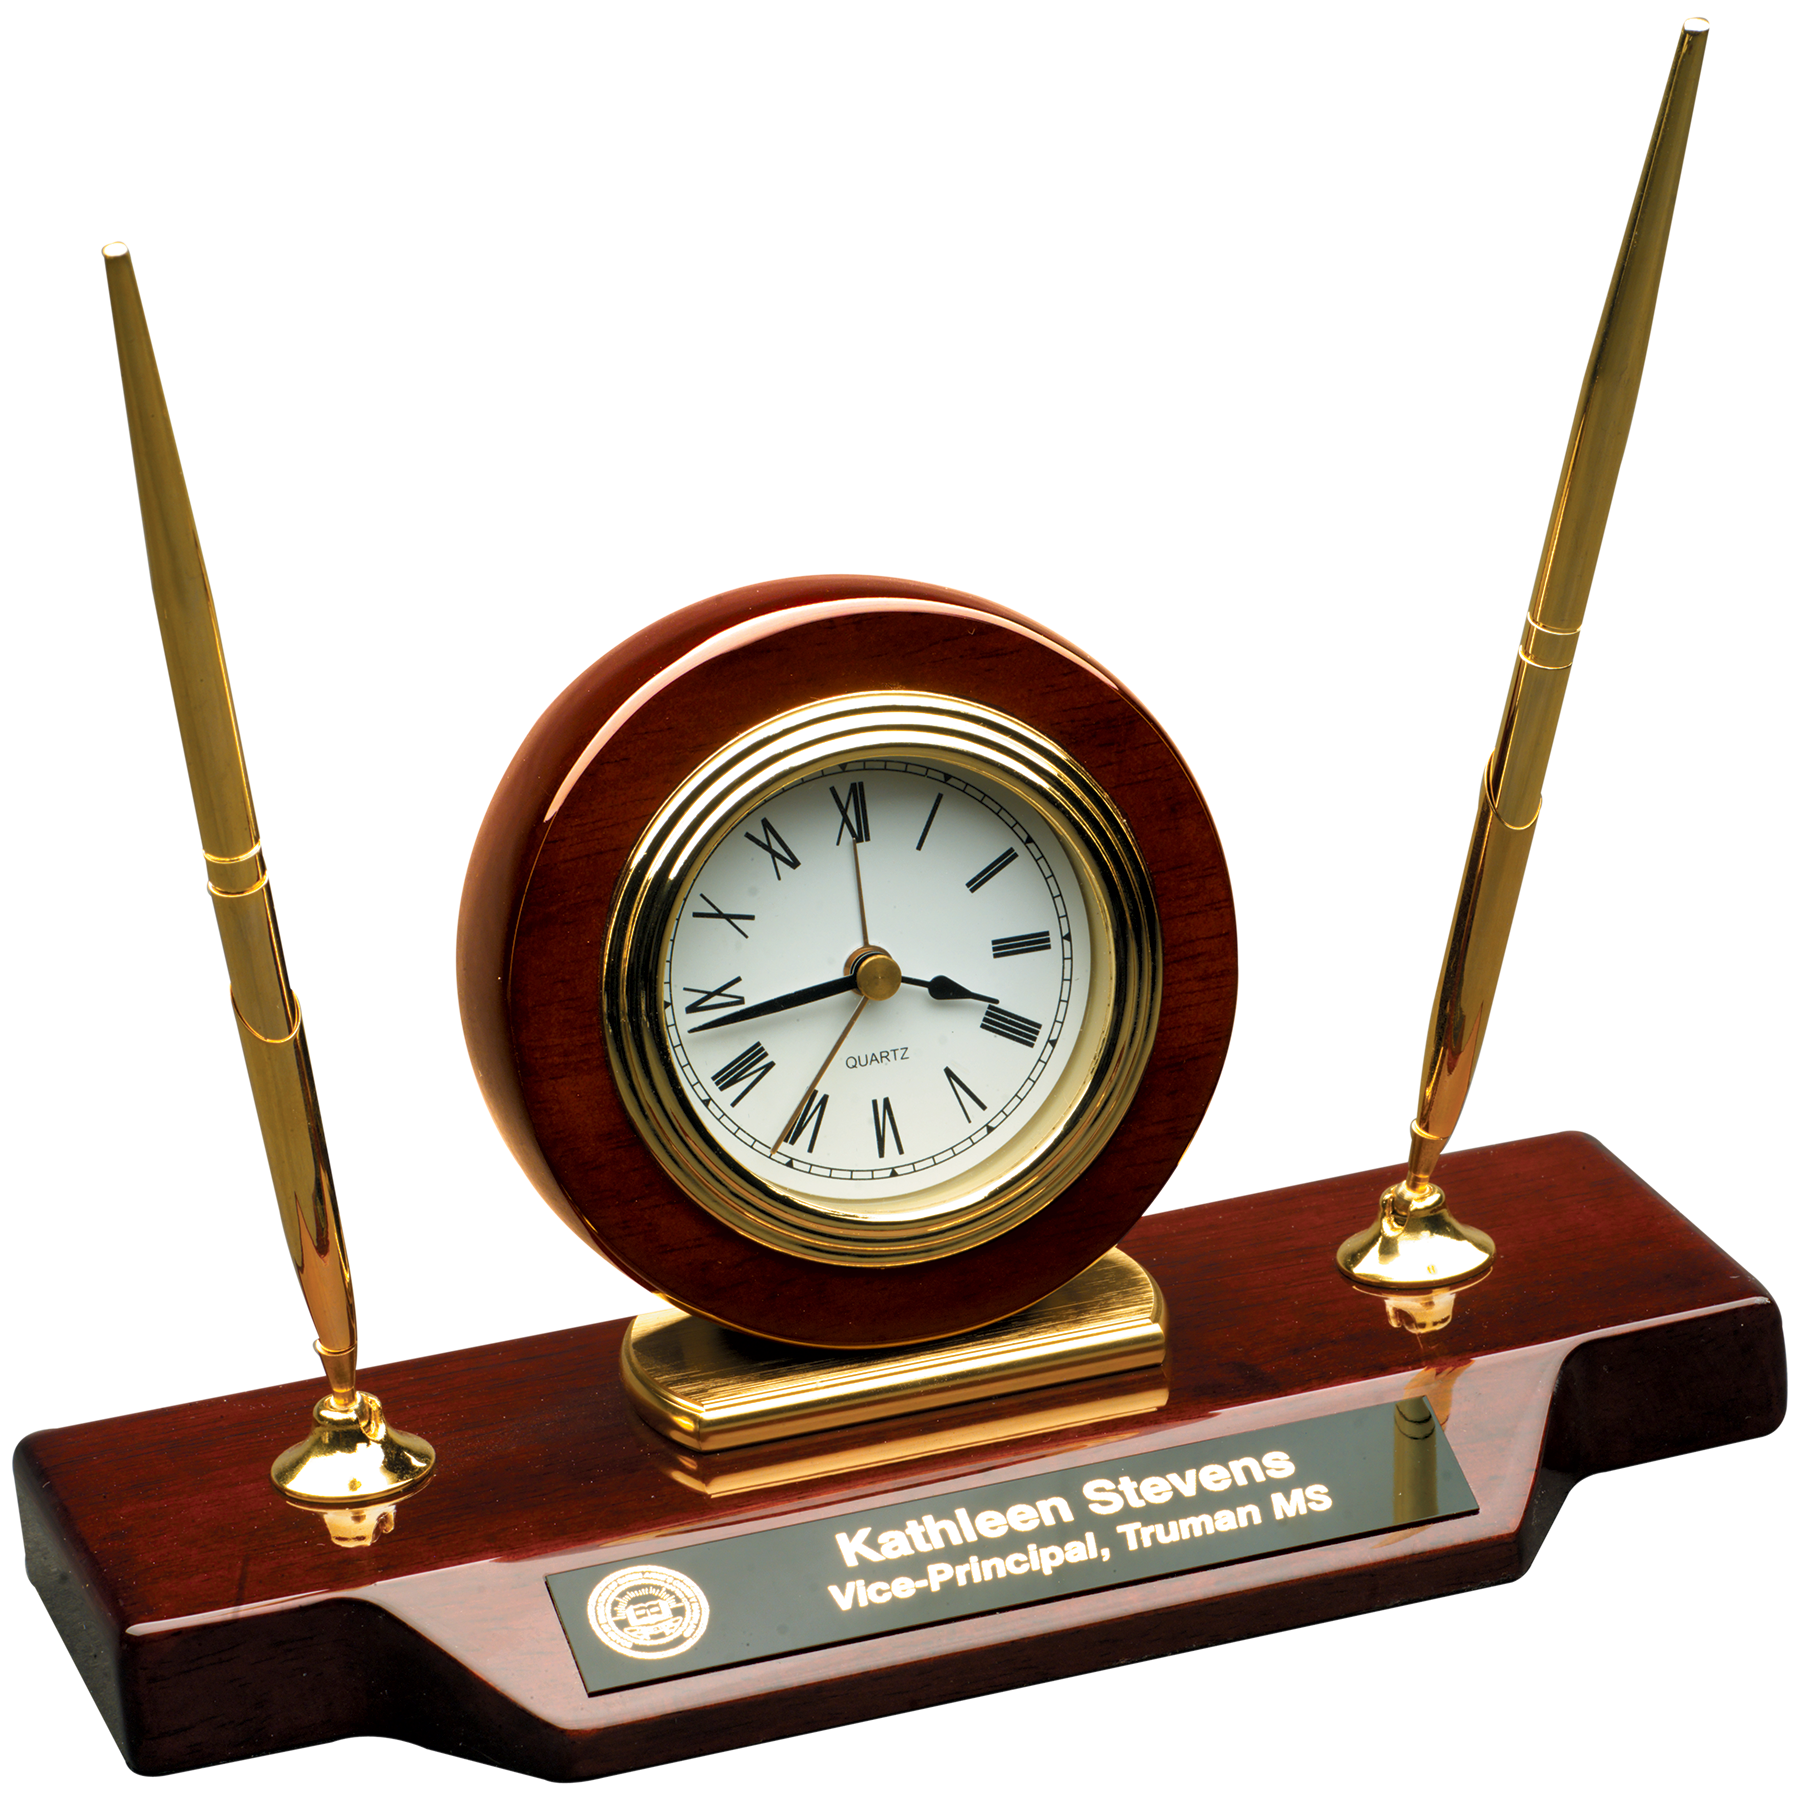 9" x 4 3/4" Piano Finish Desk Clock on Base with 2 Pens